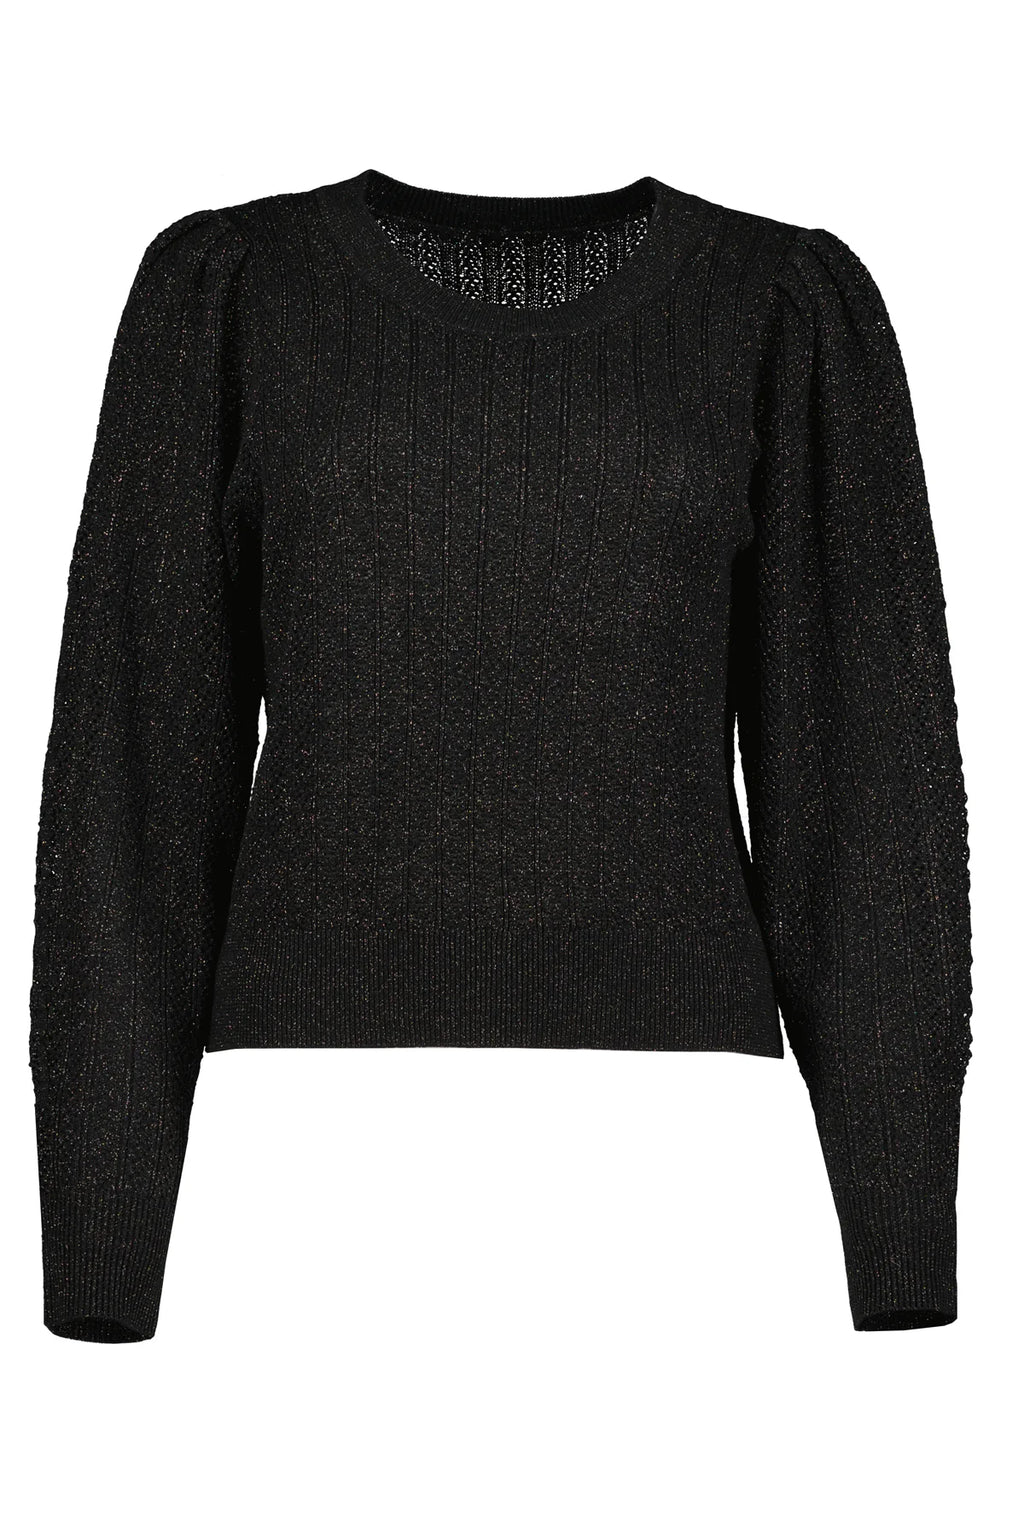 Bishop+Young Sienna Puff Sleeve Sweater